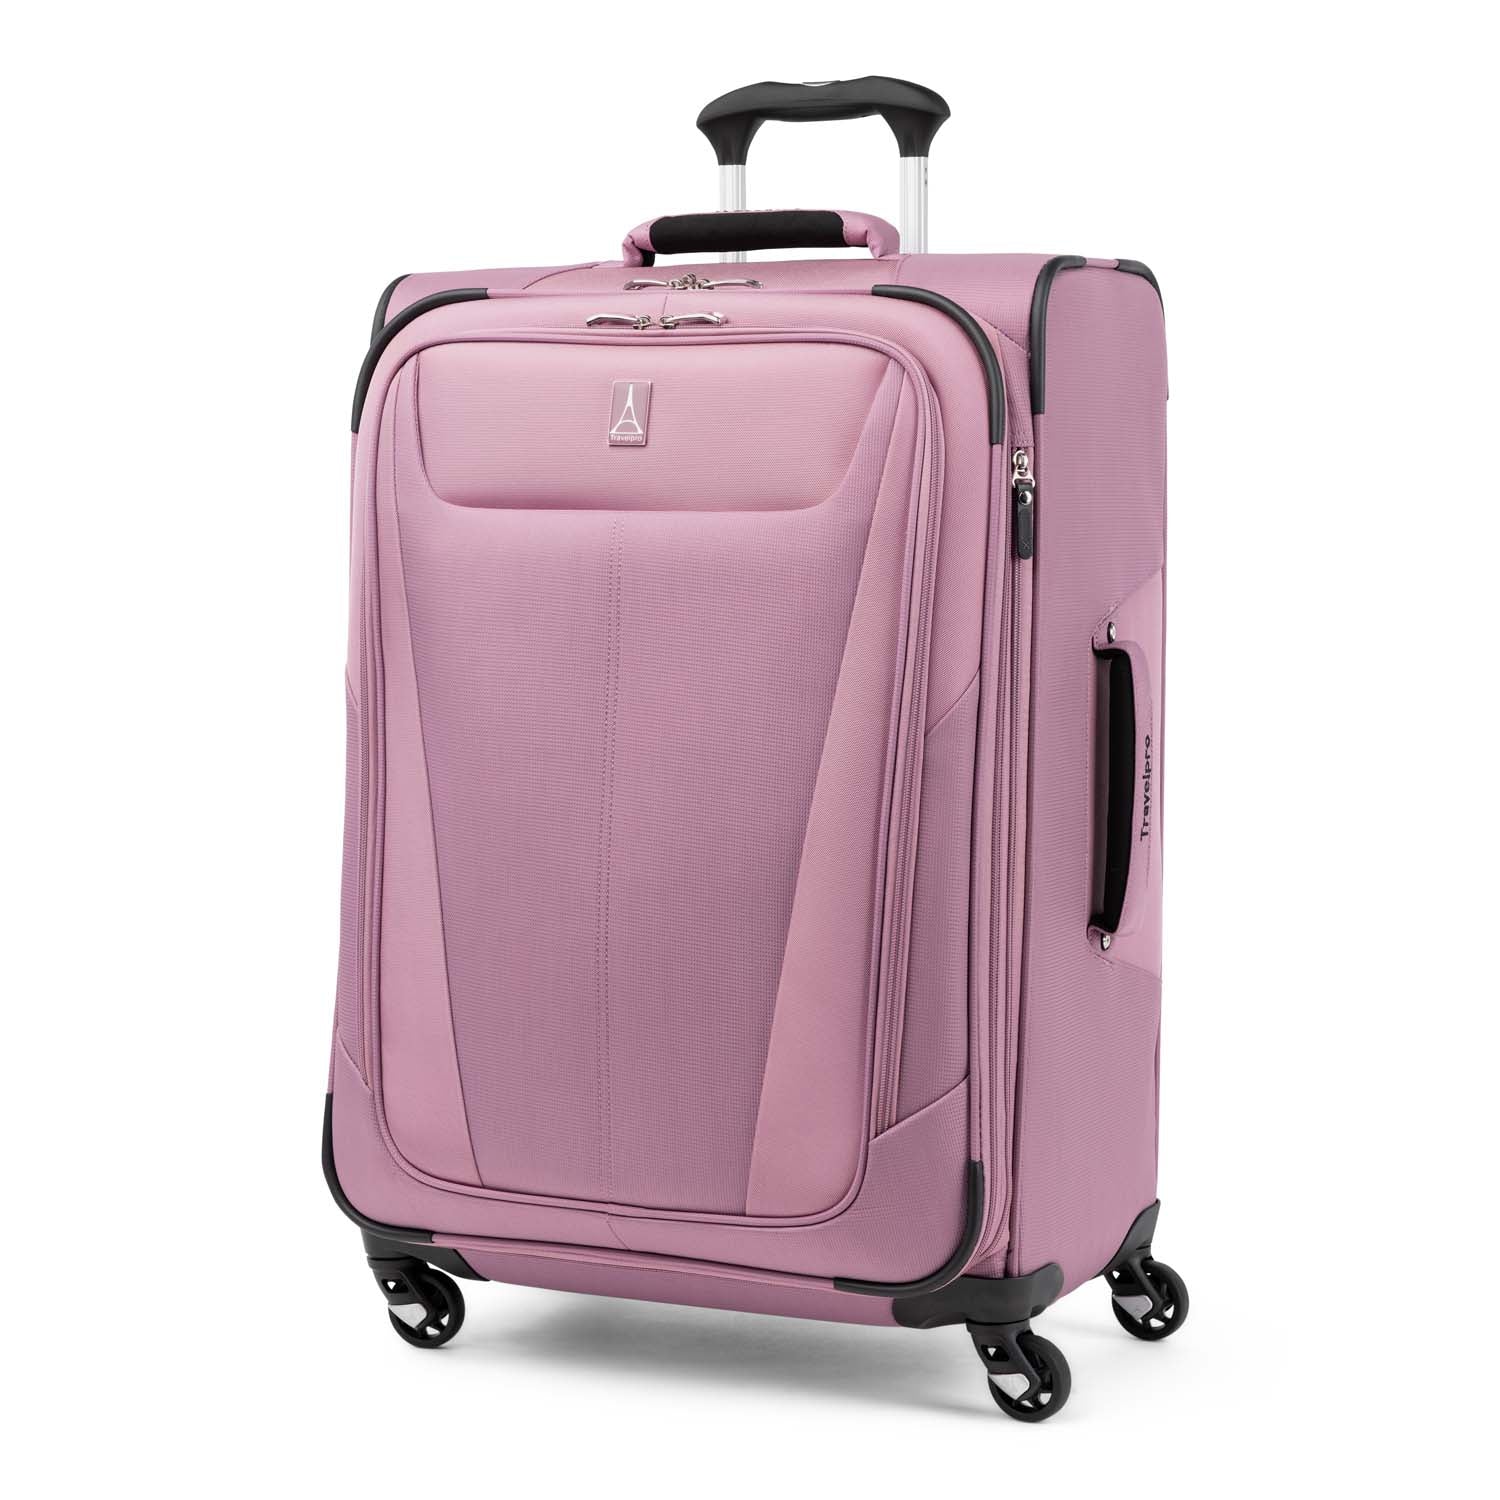 Travelpro Maxlite 5 25 Inch Expandable Spinner Luggage - Orchid